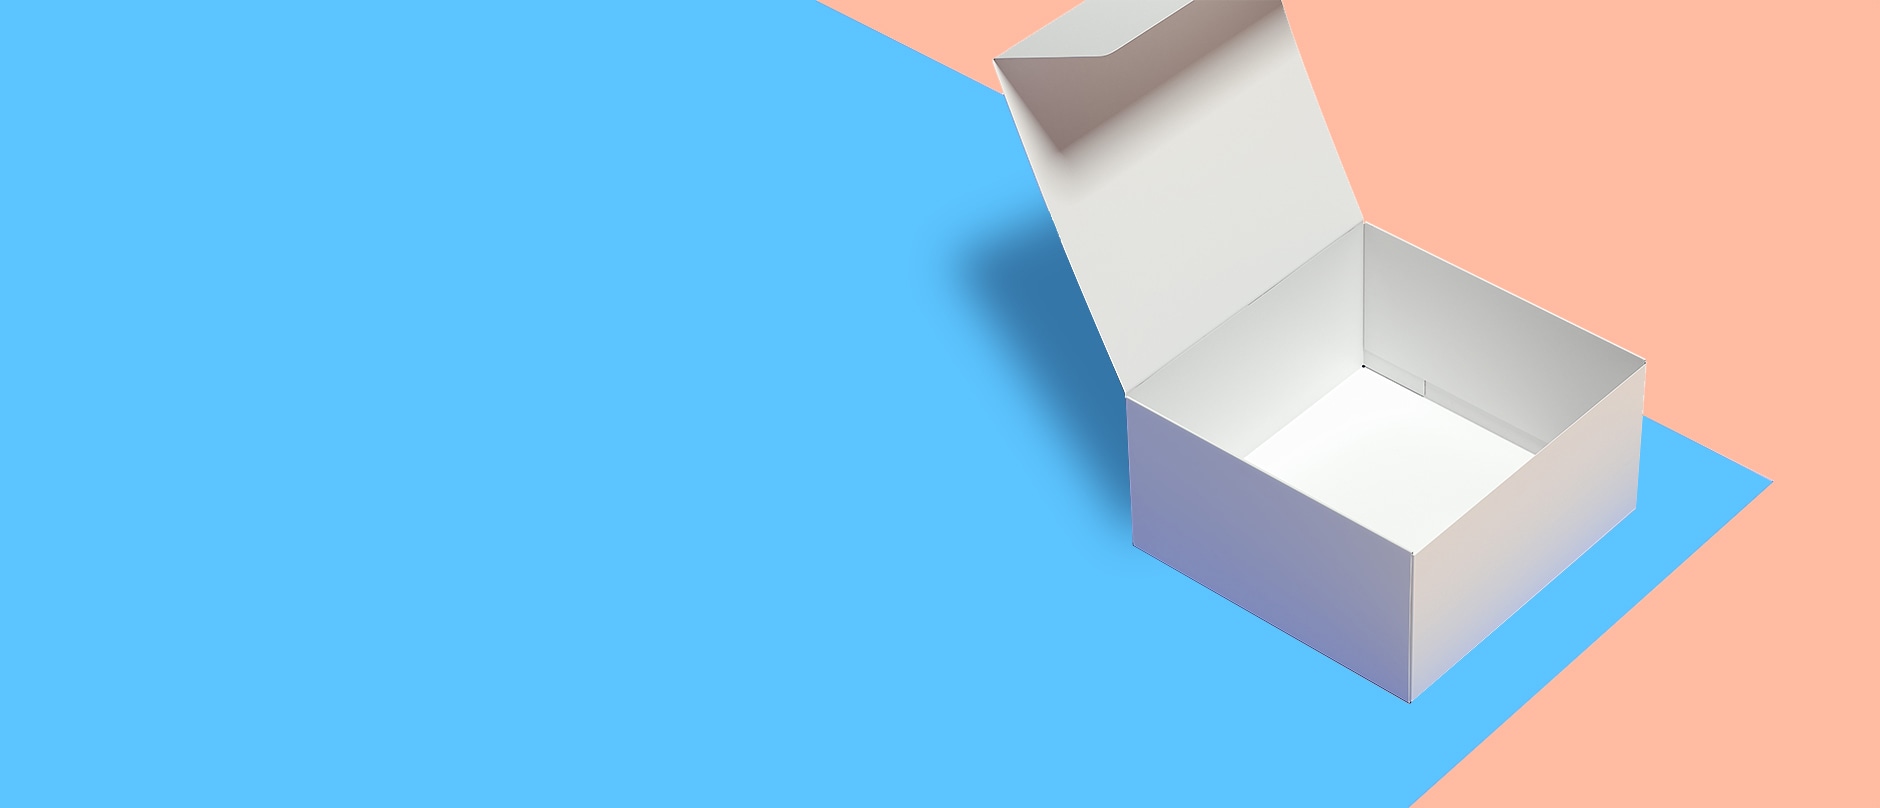 open white box on blue and peach background